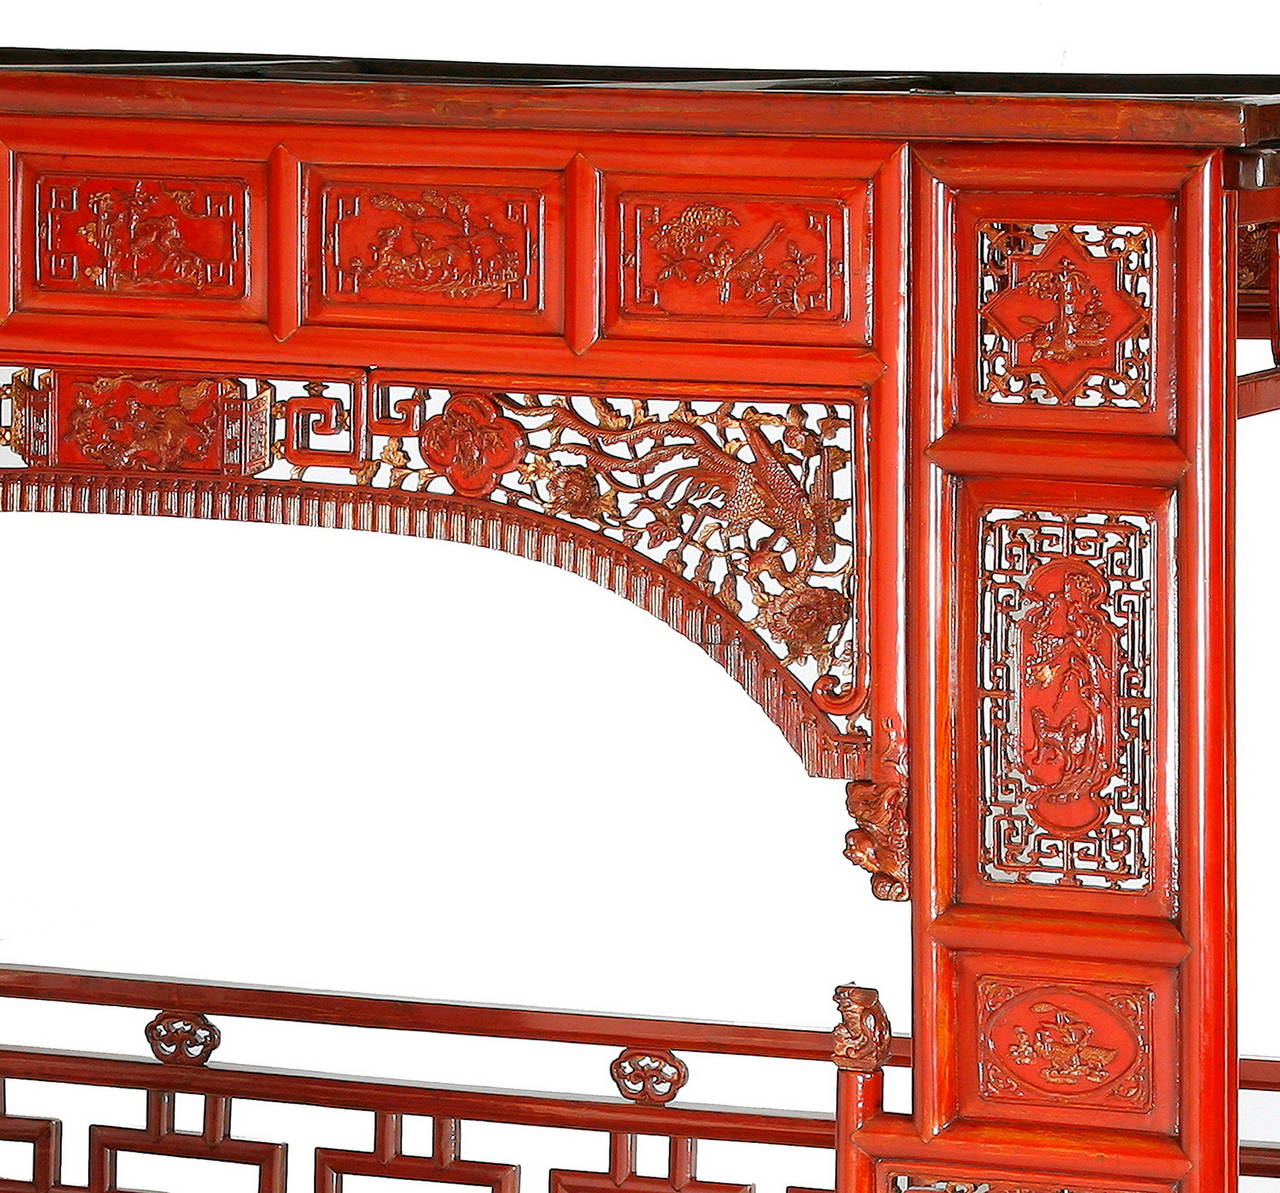 Chinese Antique Red Lacquer Gilt Six-Posted Carved Canopy or Wedding Bed, Chinoiserie